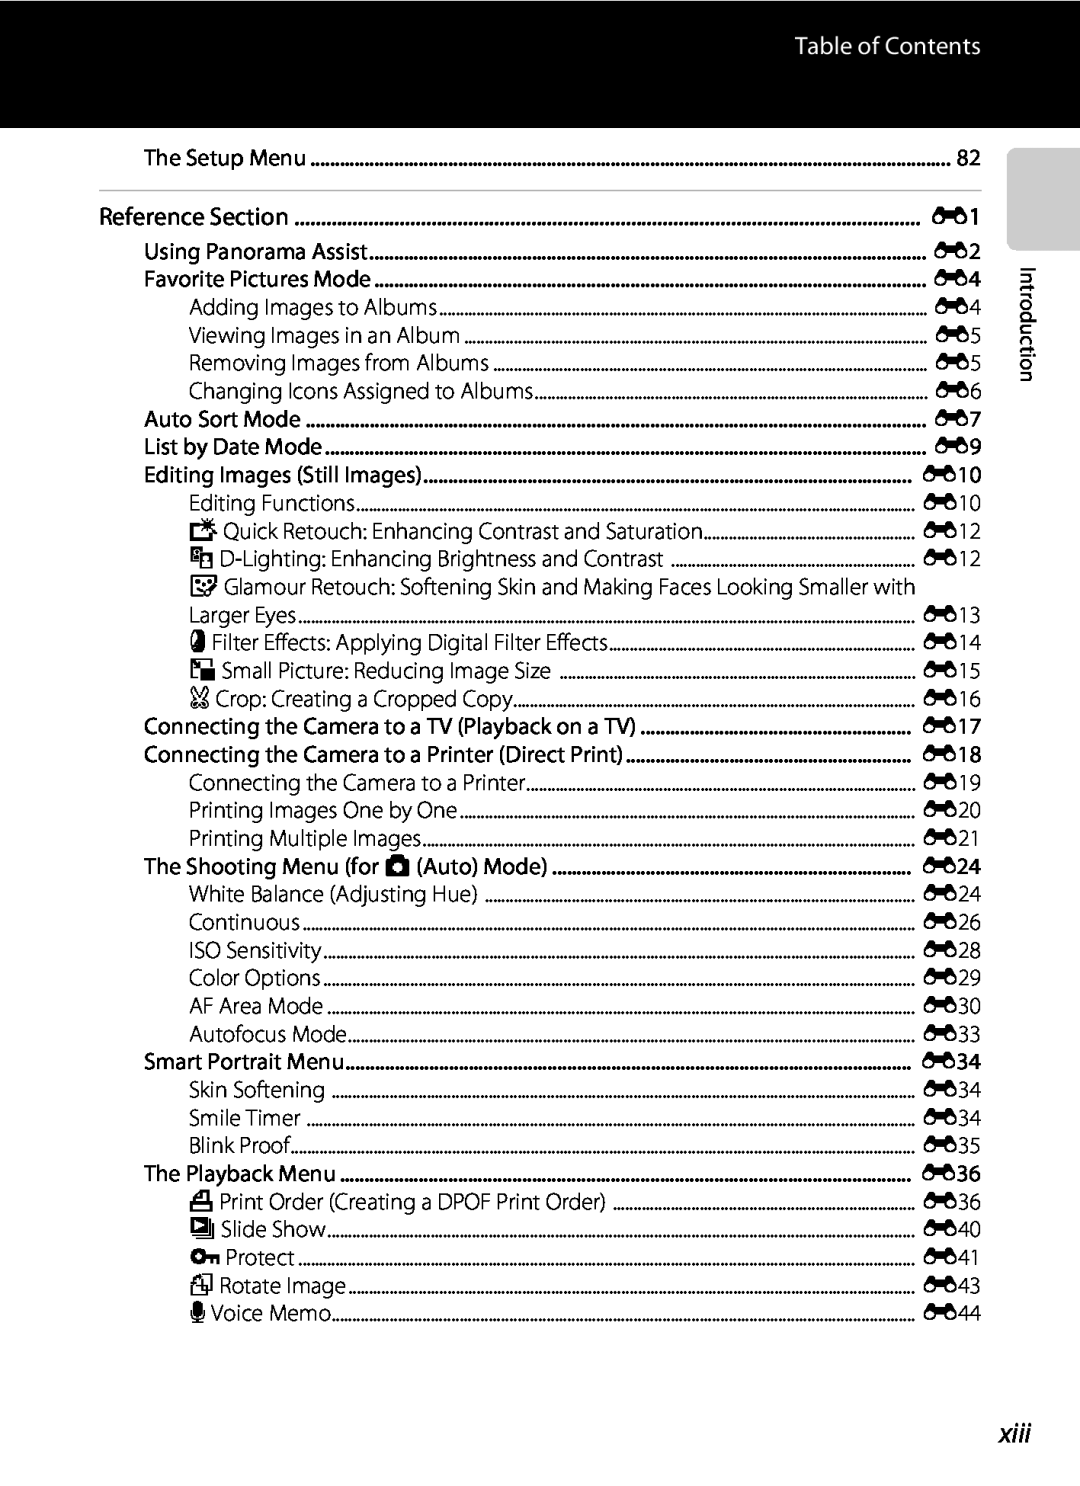 Nikon S2600 manual xiii, Table of Contents 